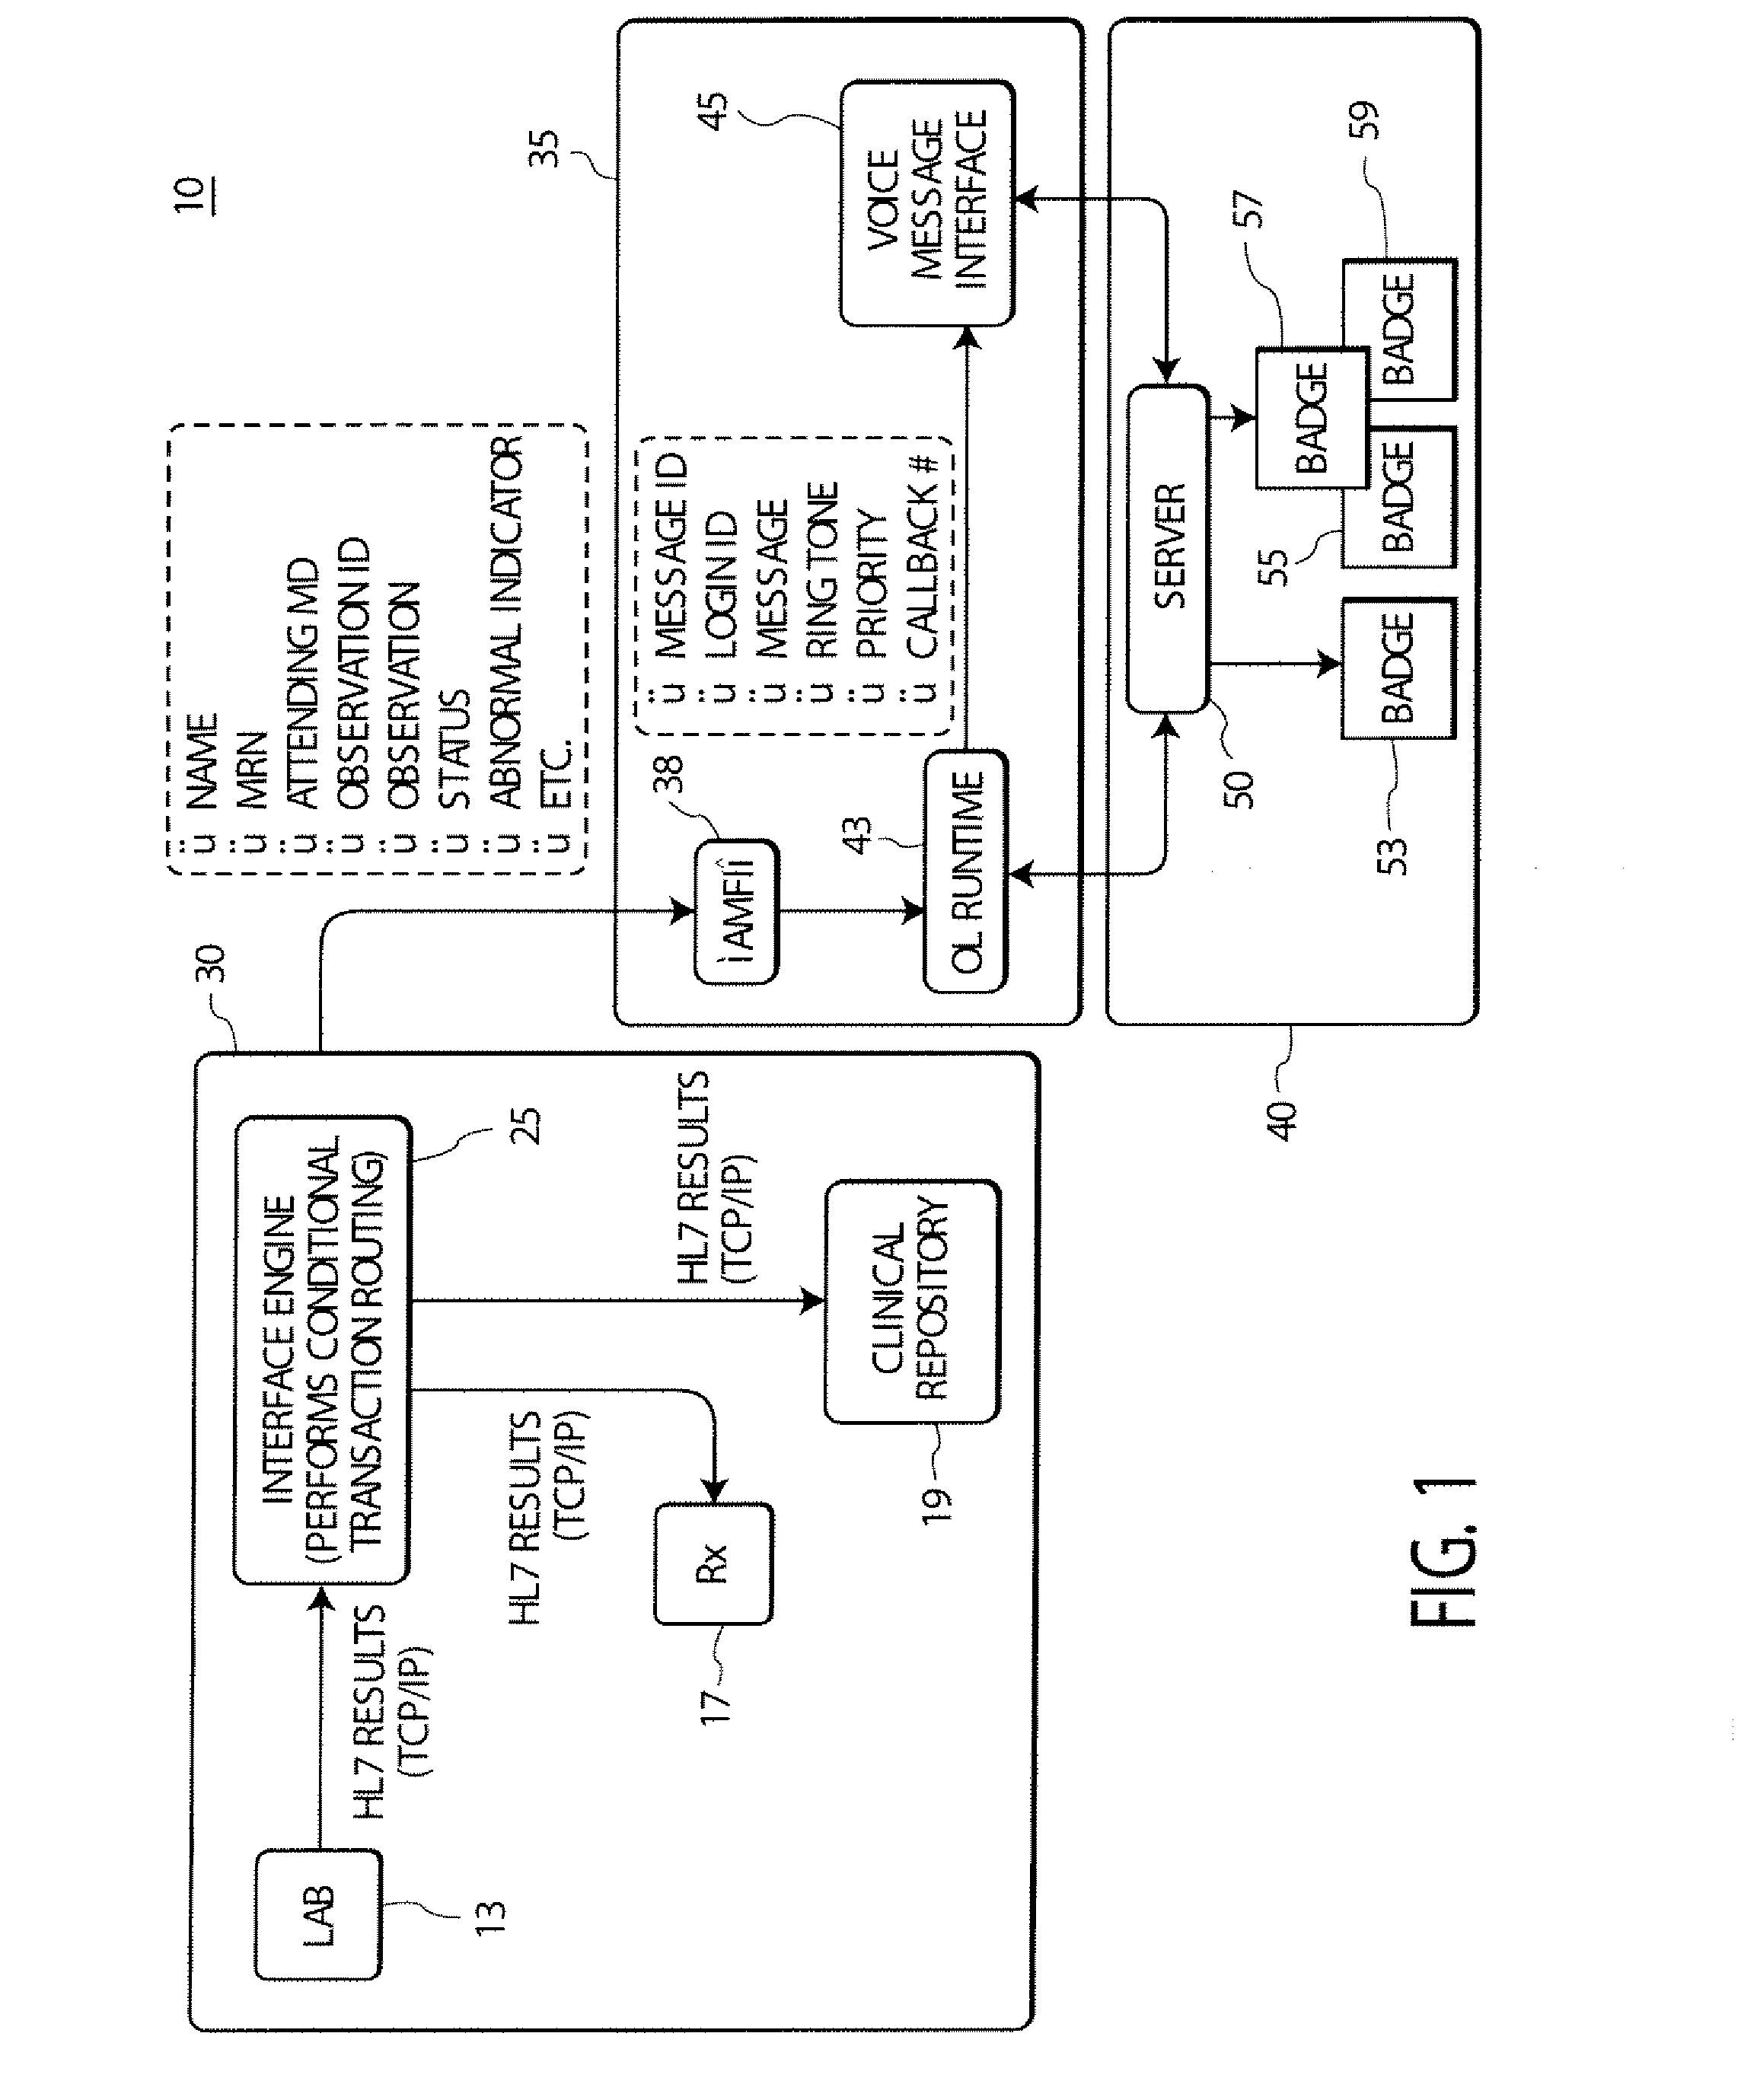 Application to Worker Communication Interface